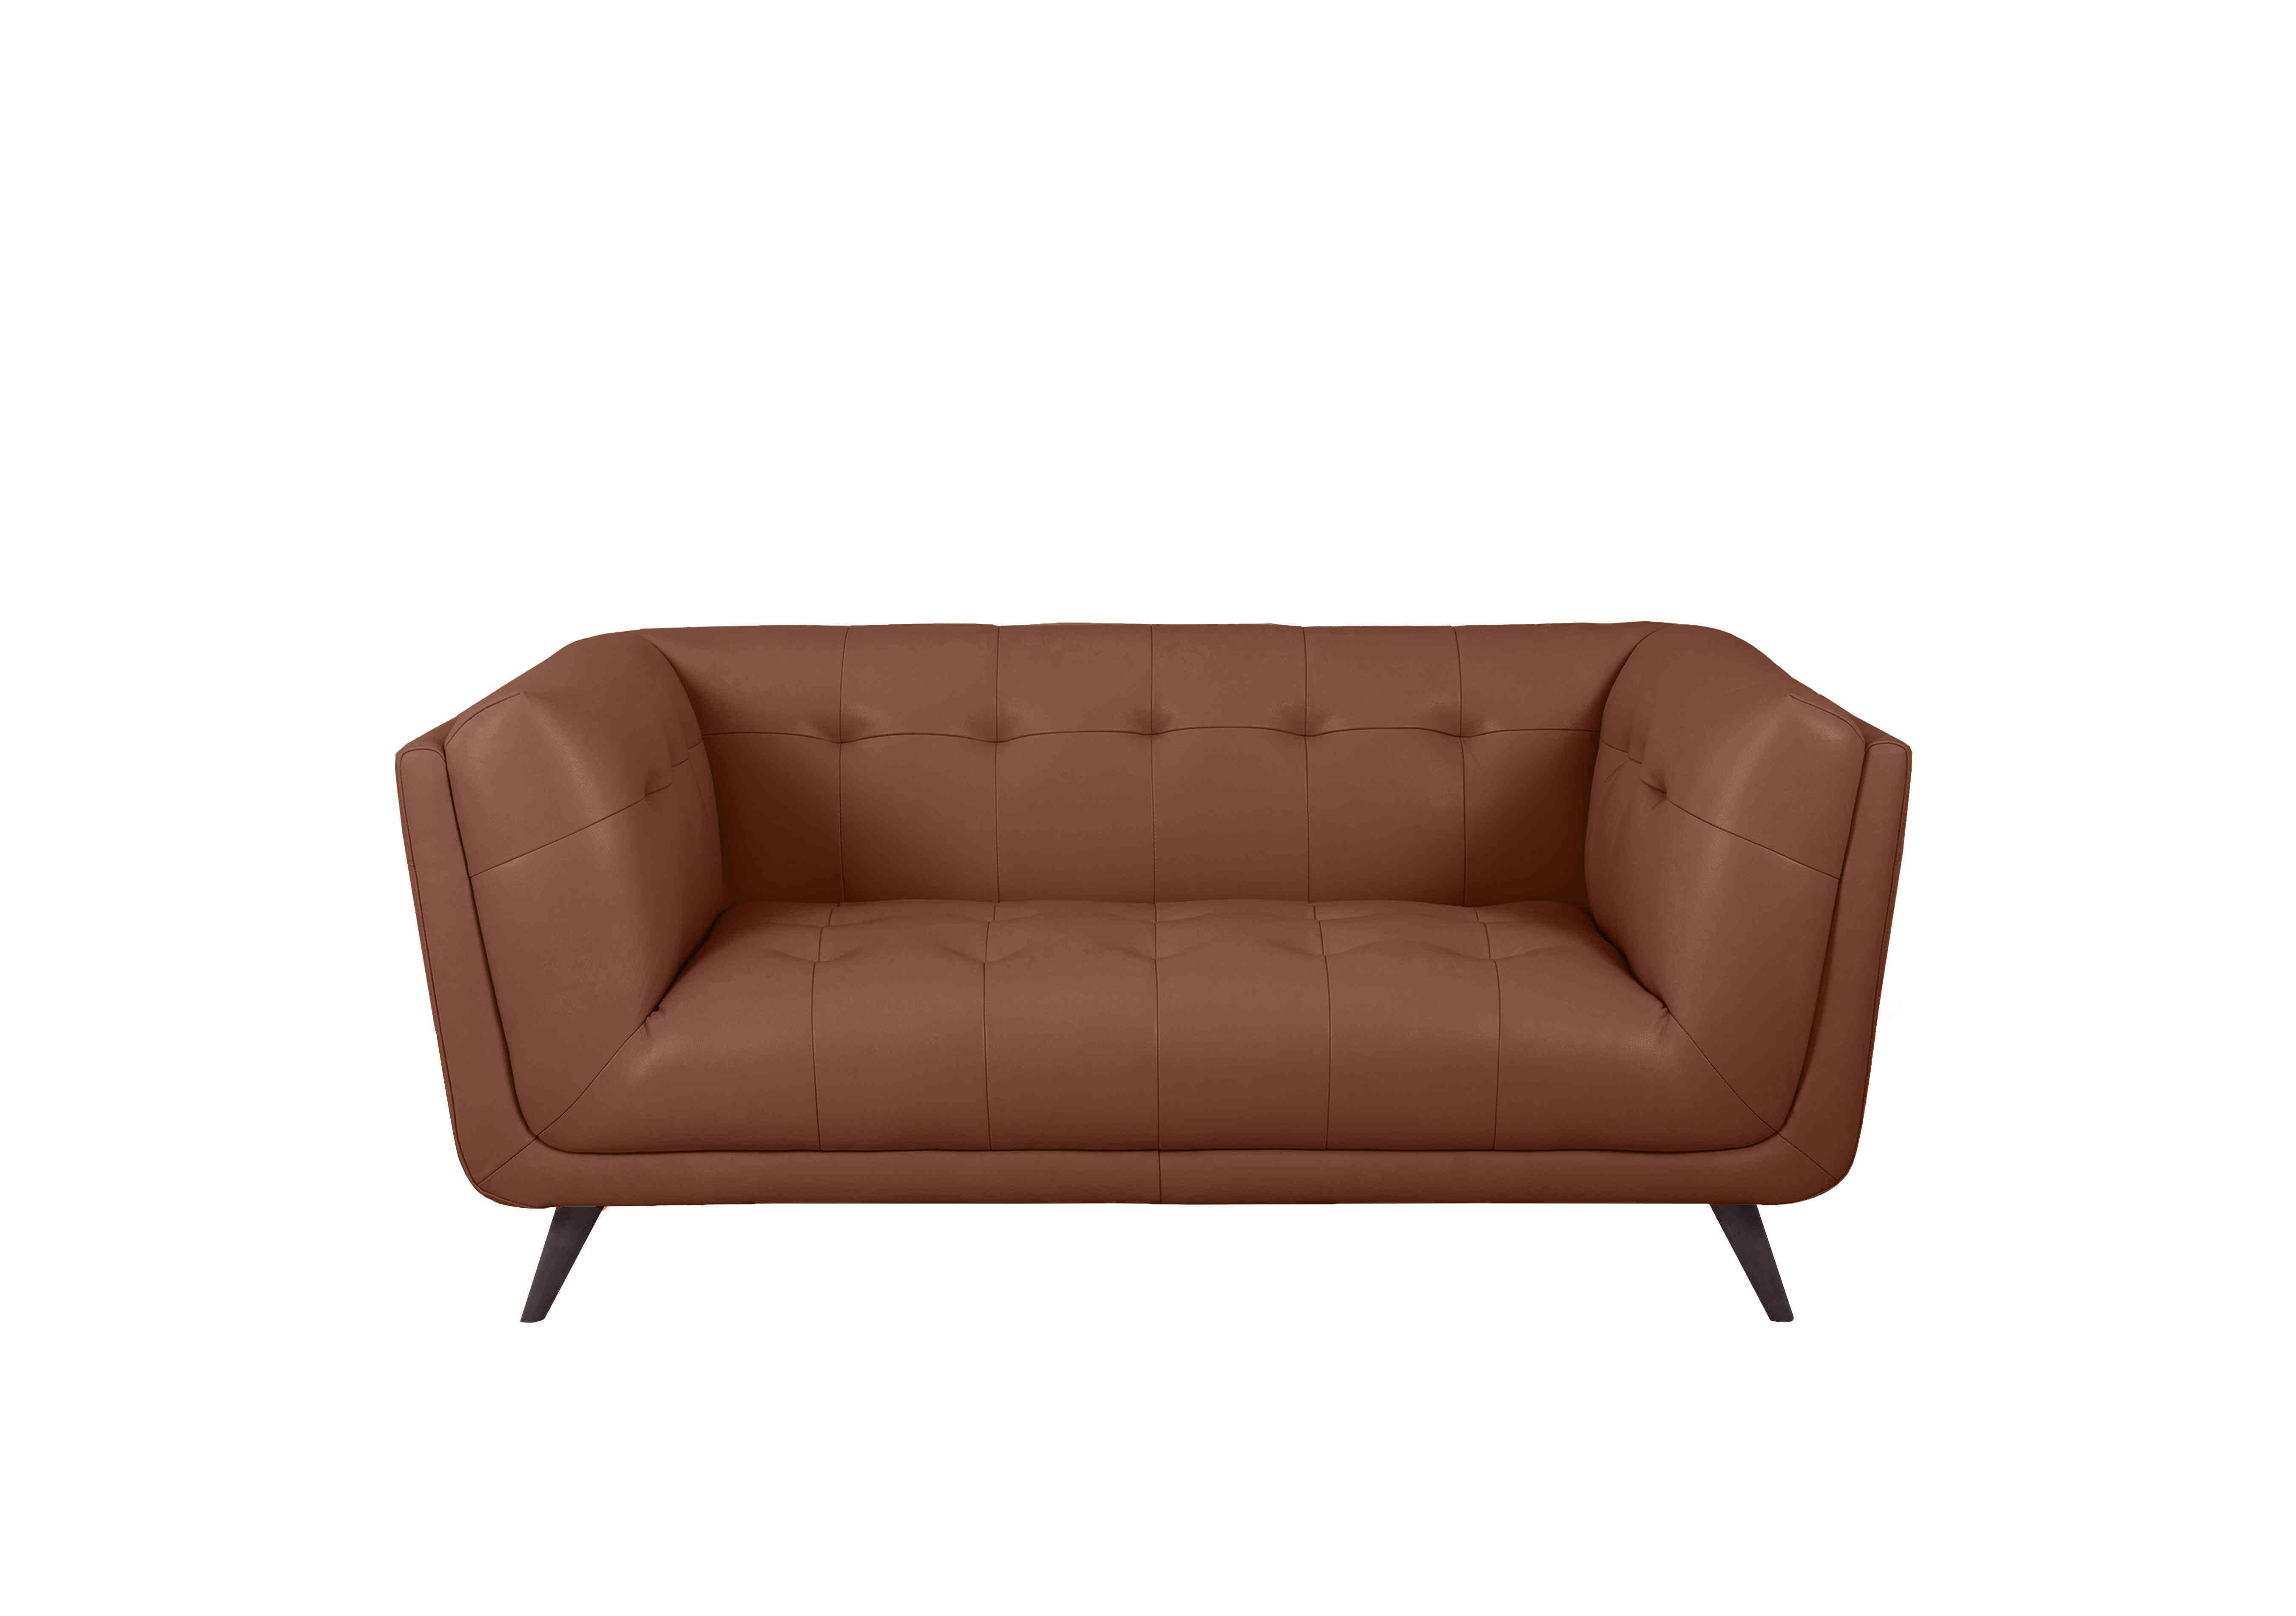 Rene 2 Seater Leather Sofa in Florida Butterscotch on Furniture Village